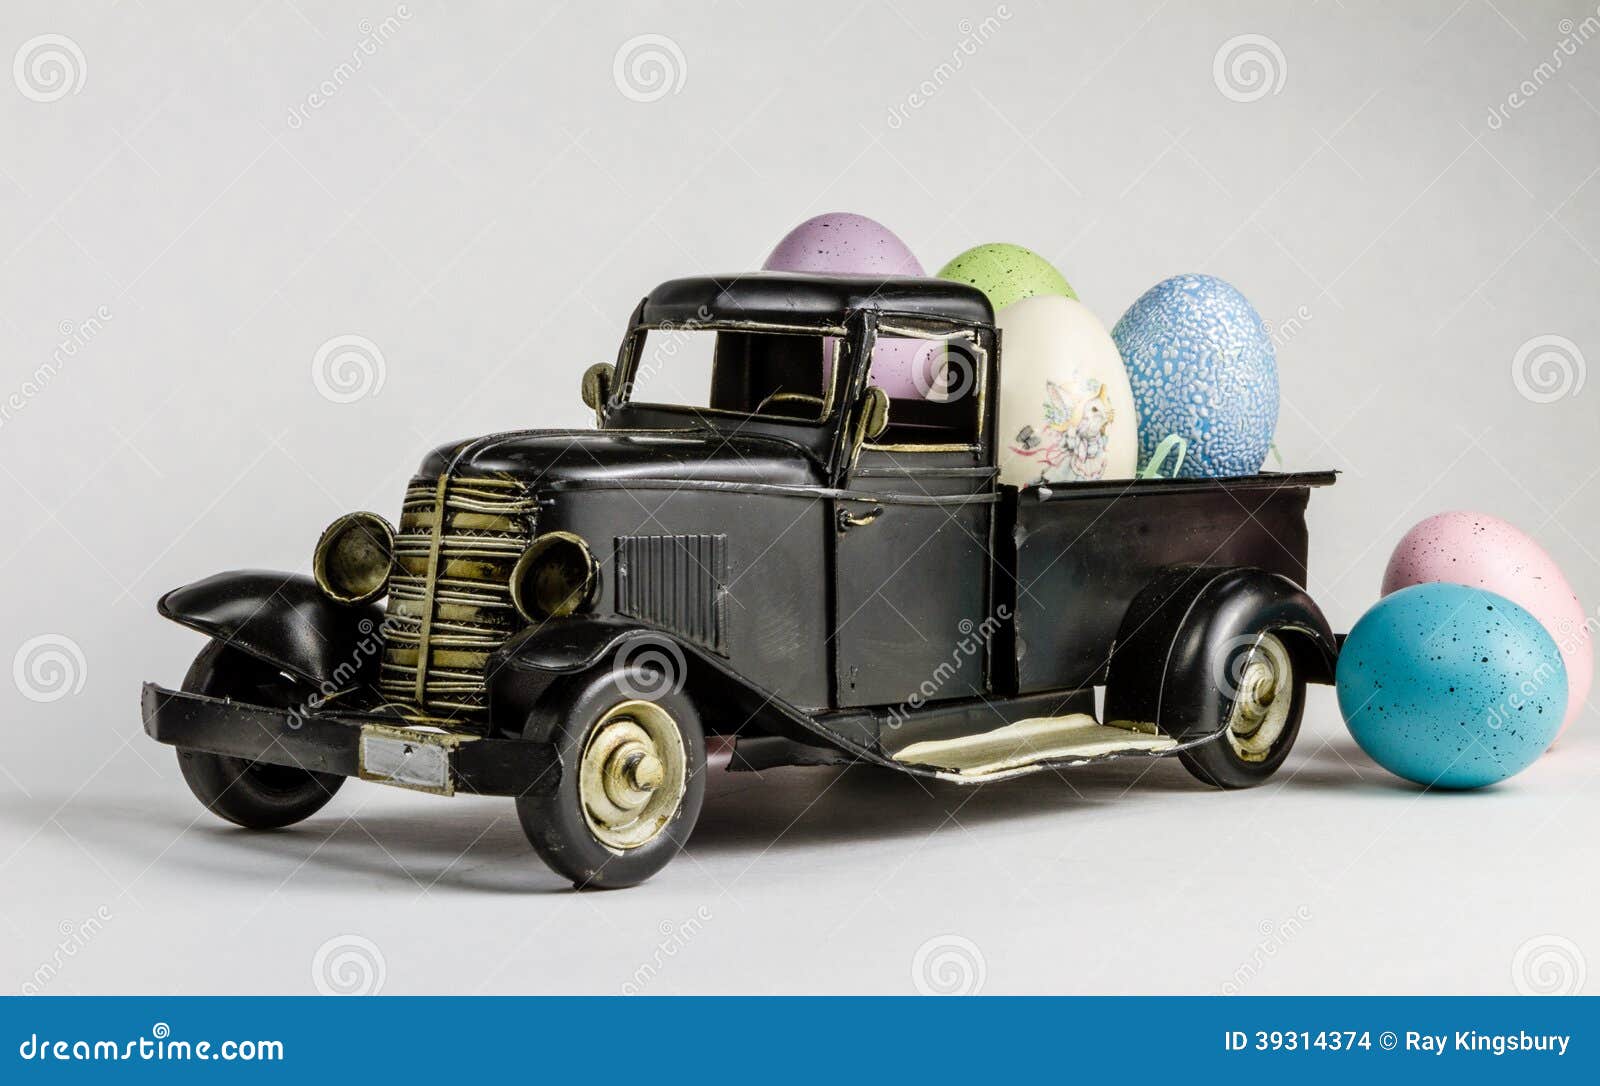 20,1209 Egg Delivery Photos   Free & Royalty Free Stock Photos from ...